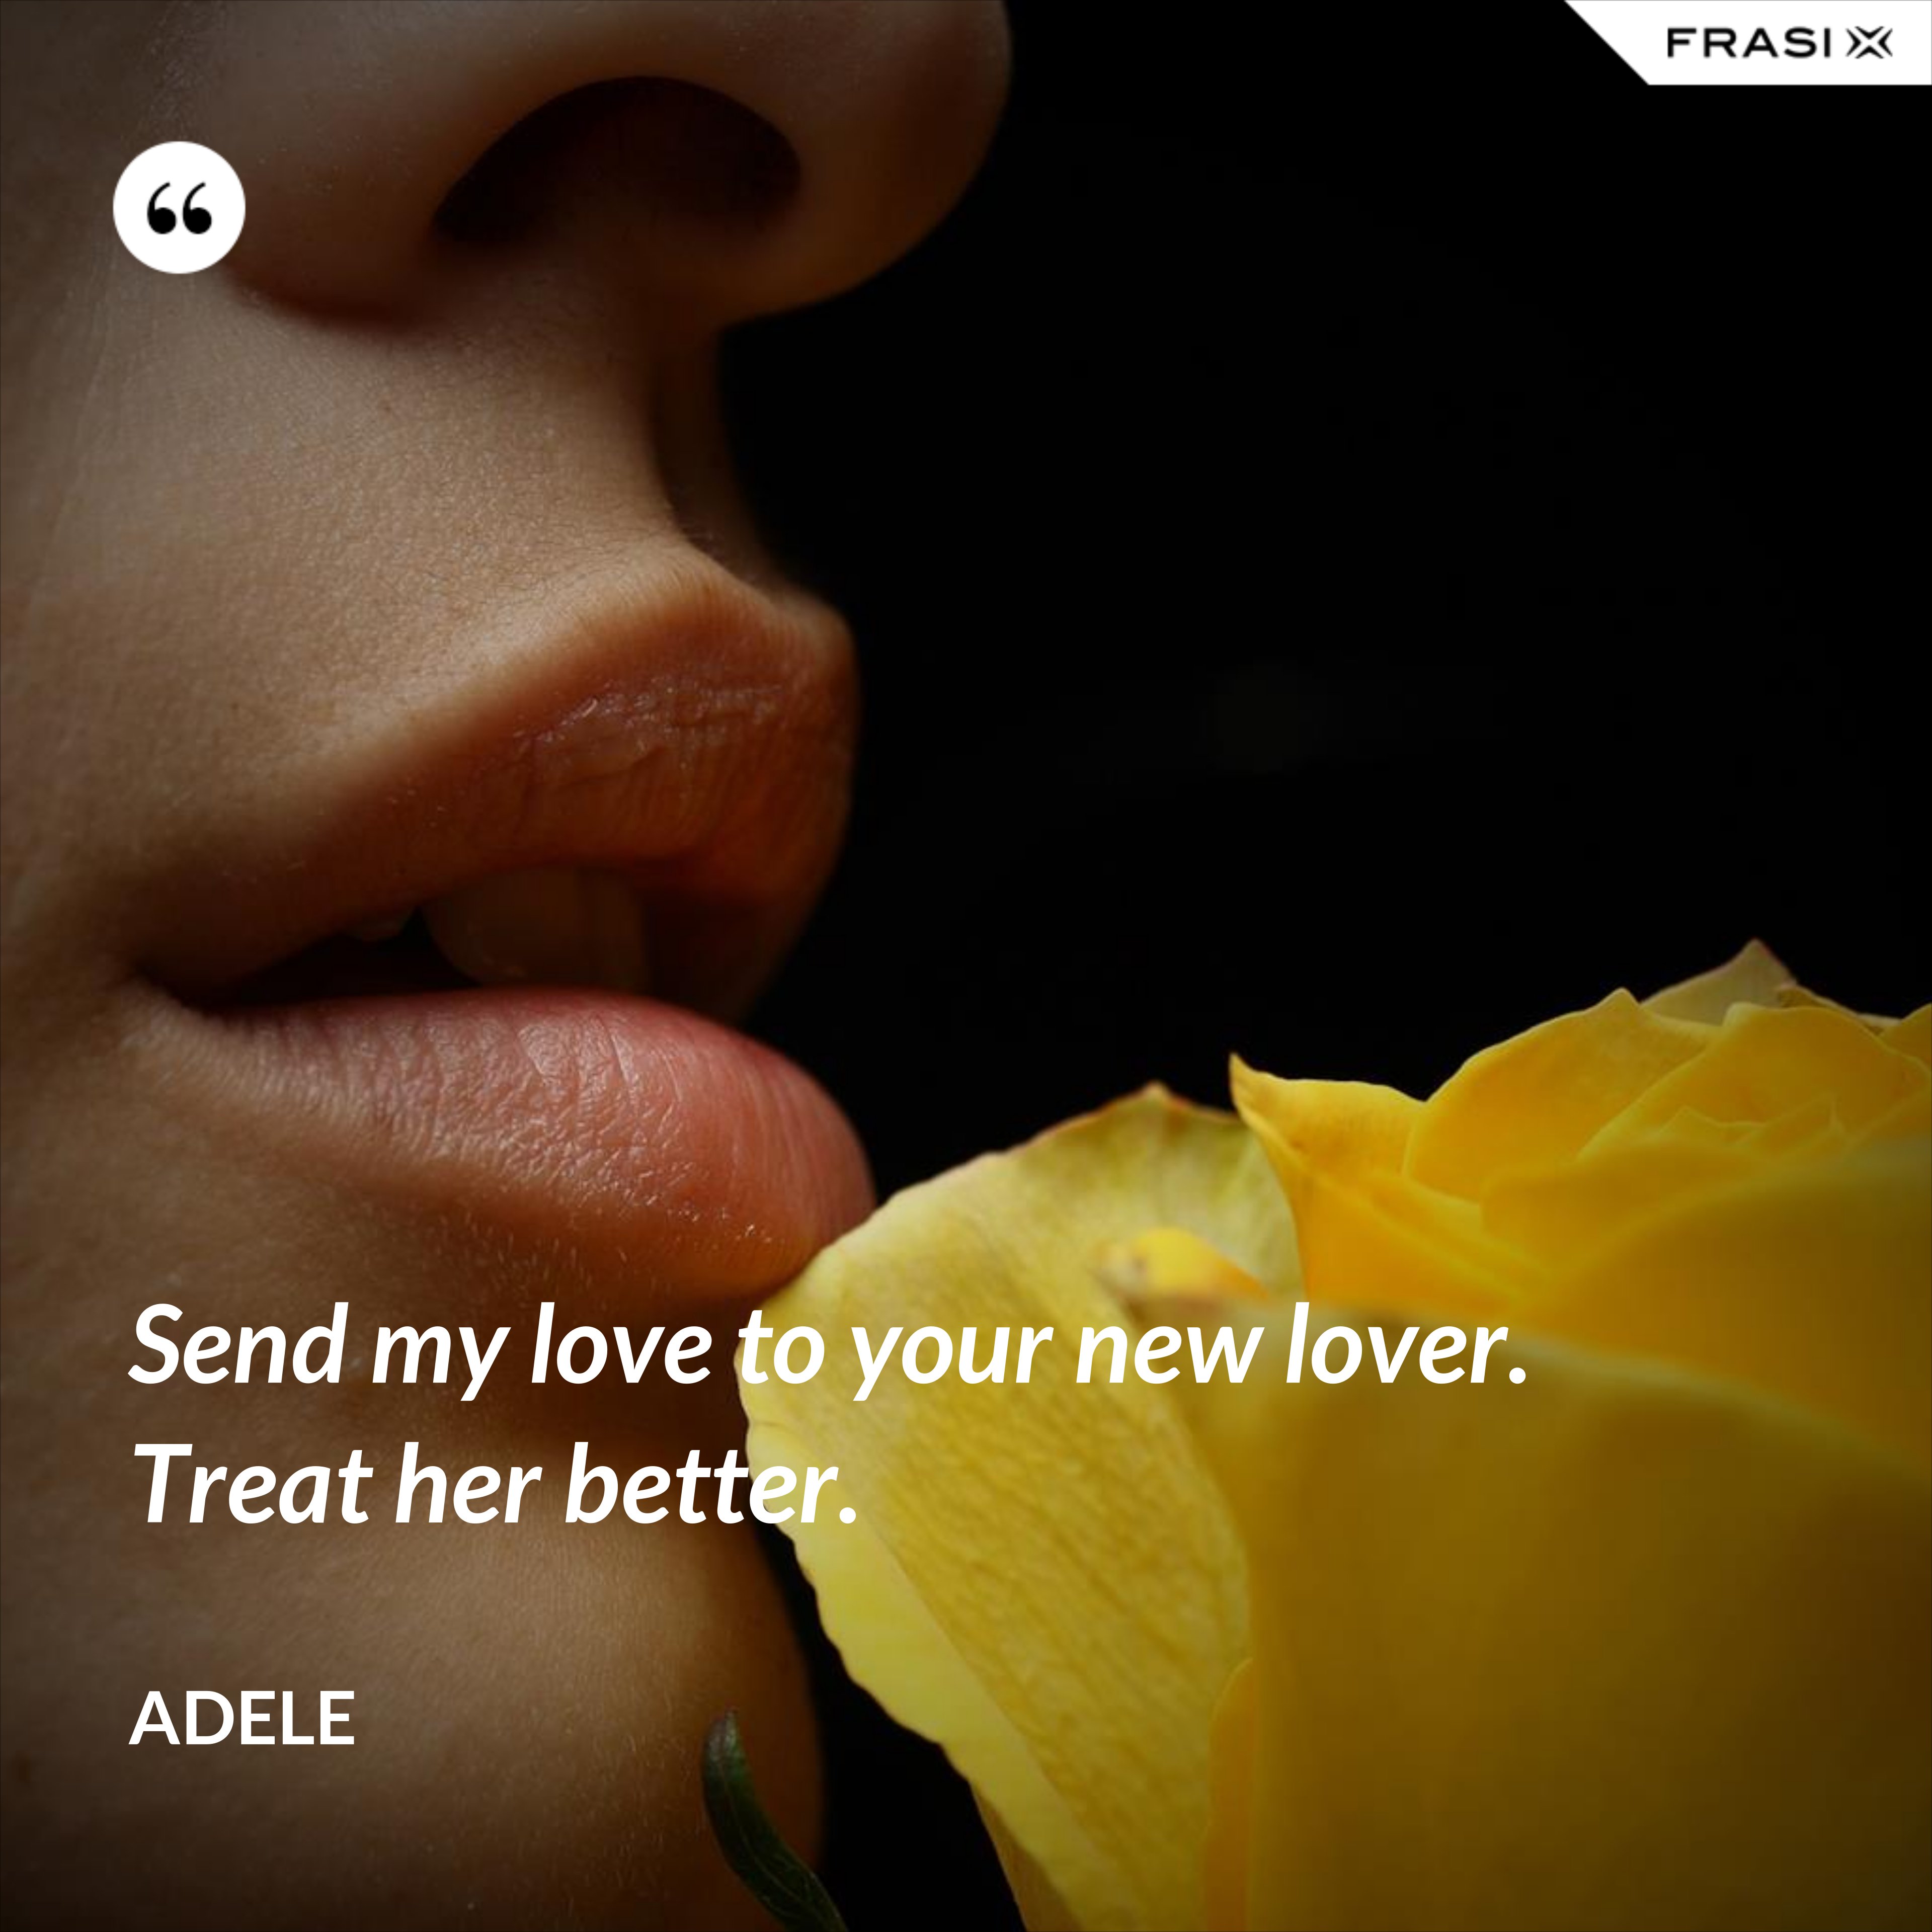 Send my love to your new lover. Treat her better. - Adele